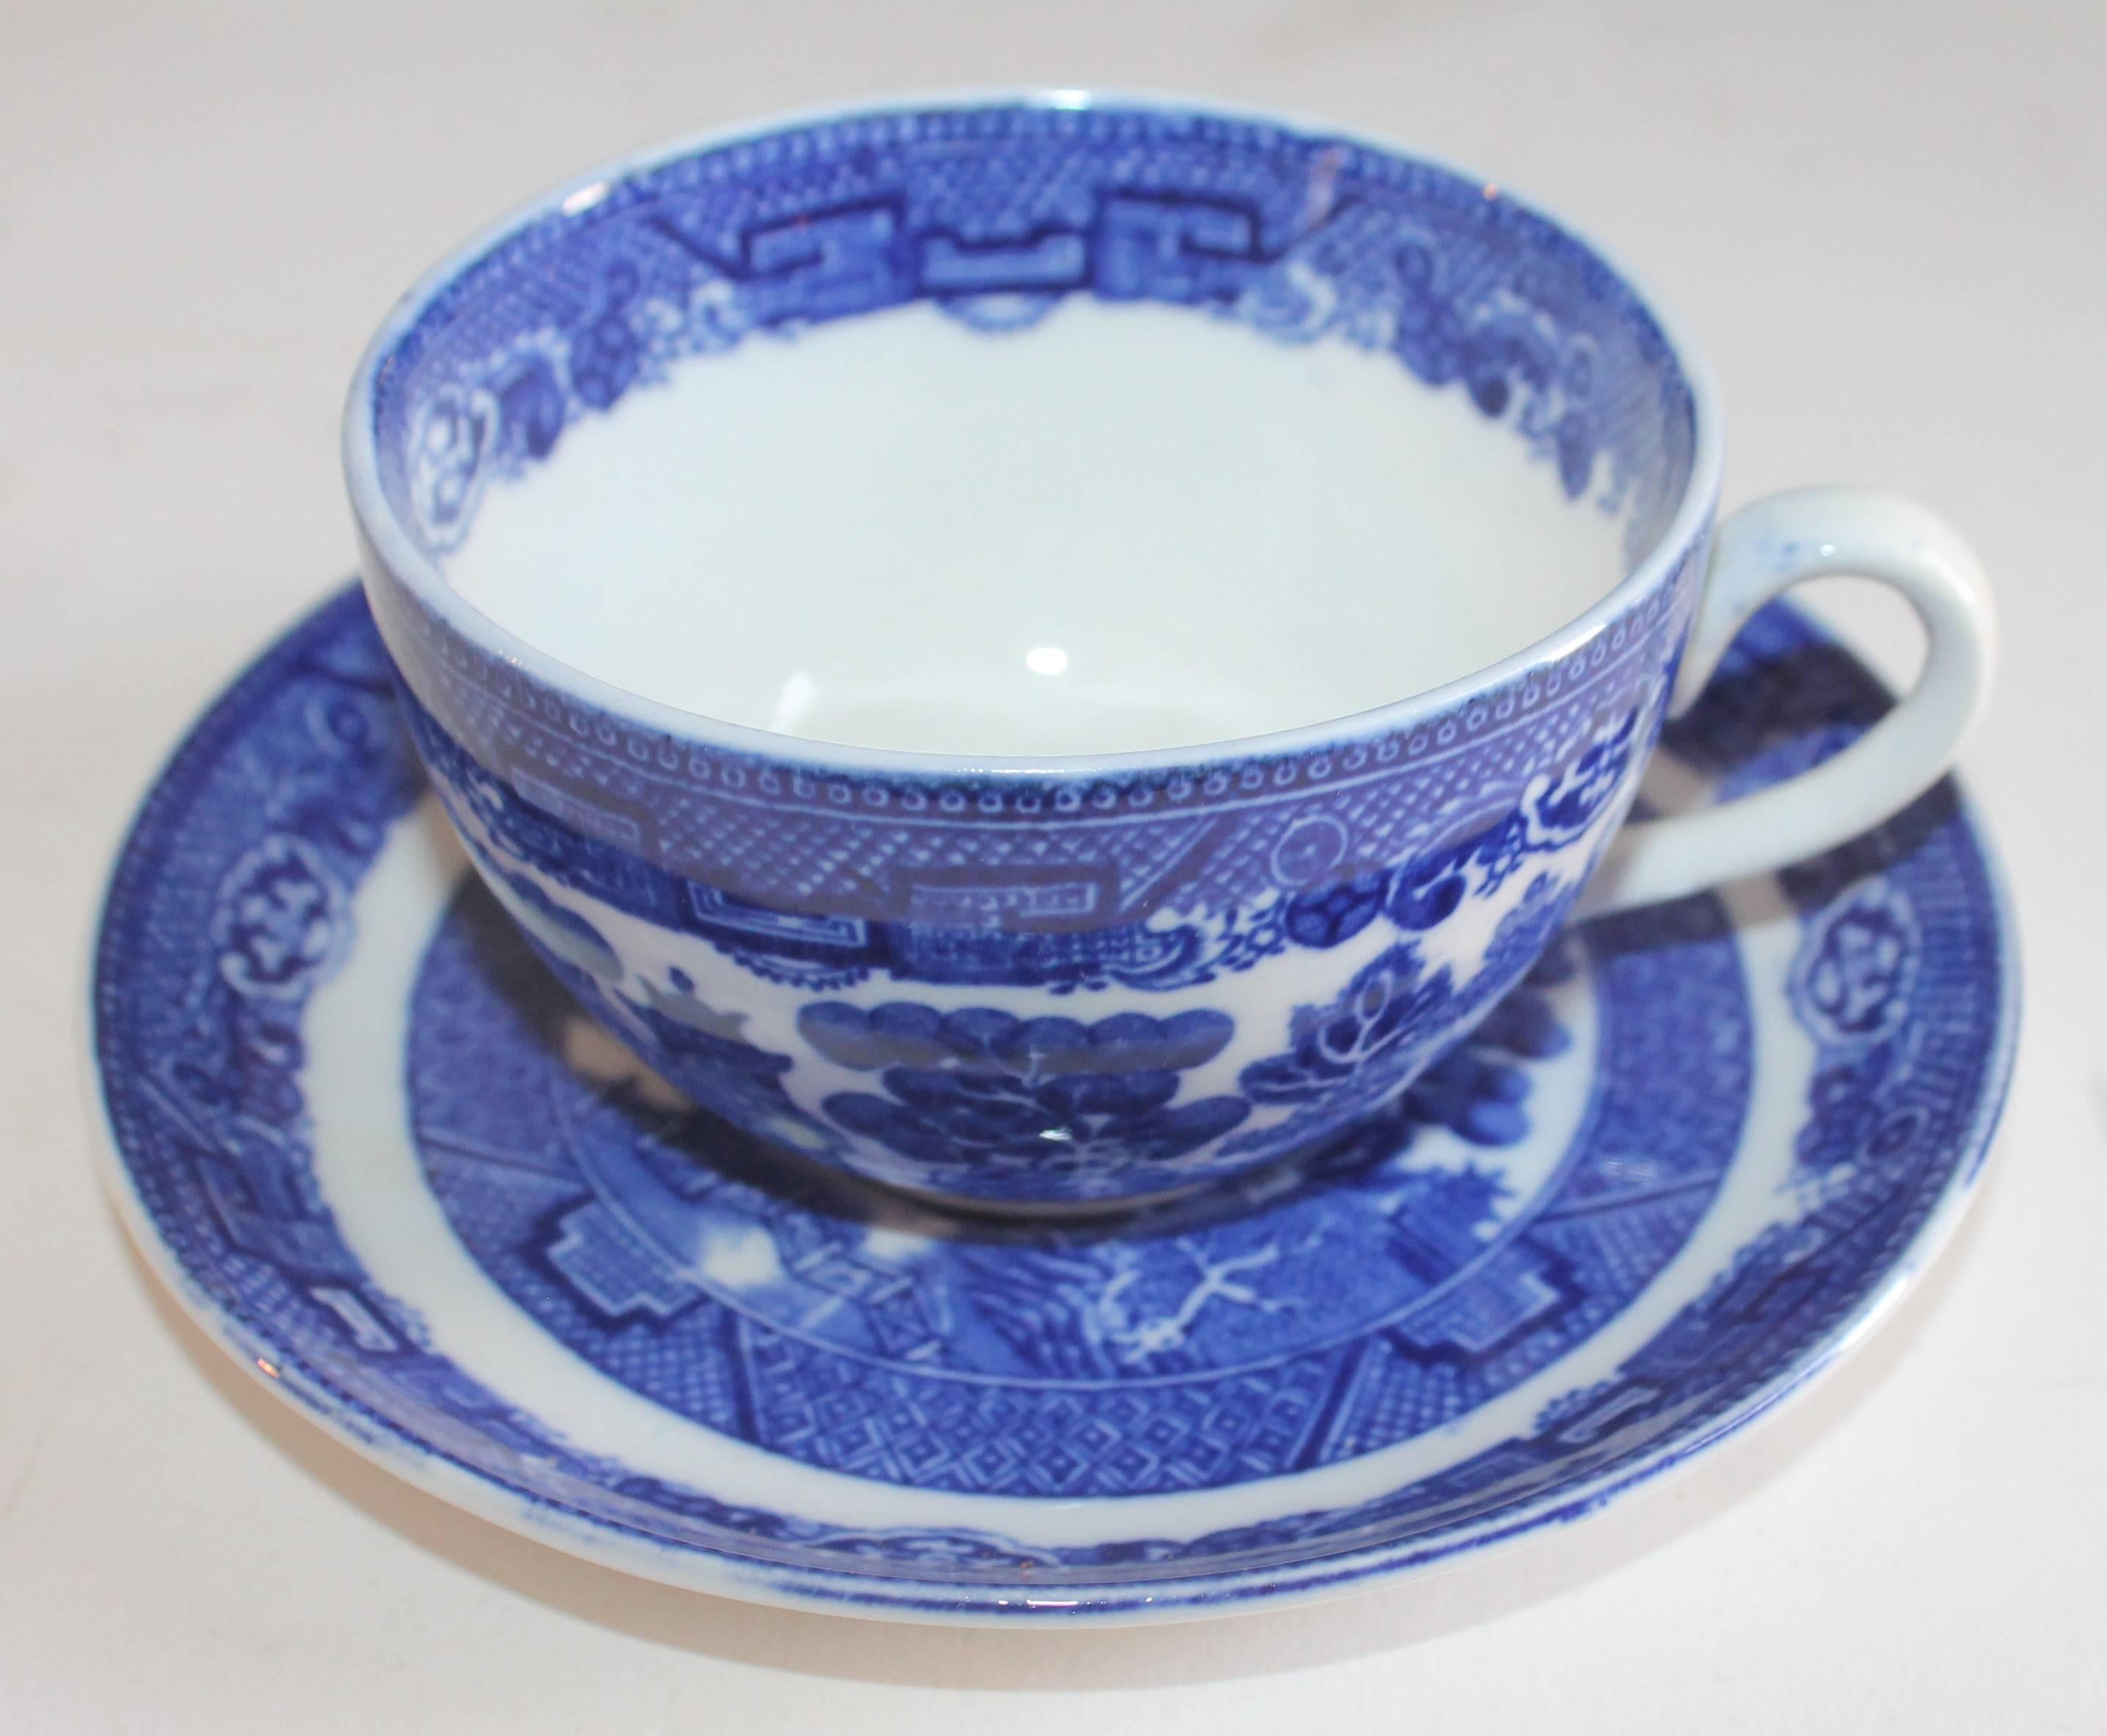 Blue Willow Serving set is Allertons, England and all pieces are signed and in pristine condition. This is a amazing set.


Dimensions are as follows:
Eight - 5 3/8inch diameter small berry bowls
Six - 9 inch diameter dinner plates
Eight - 6inch